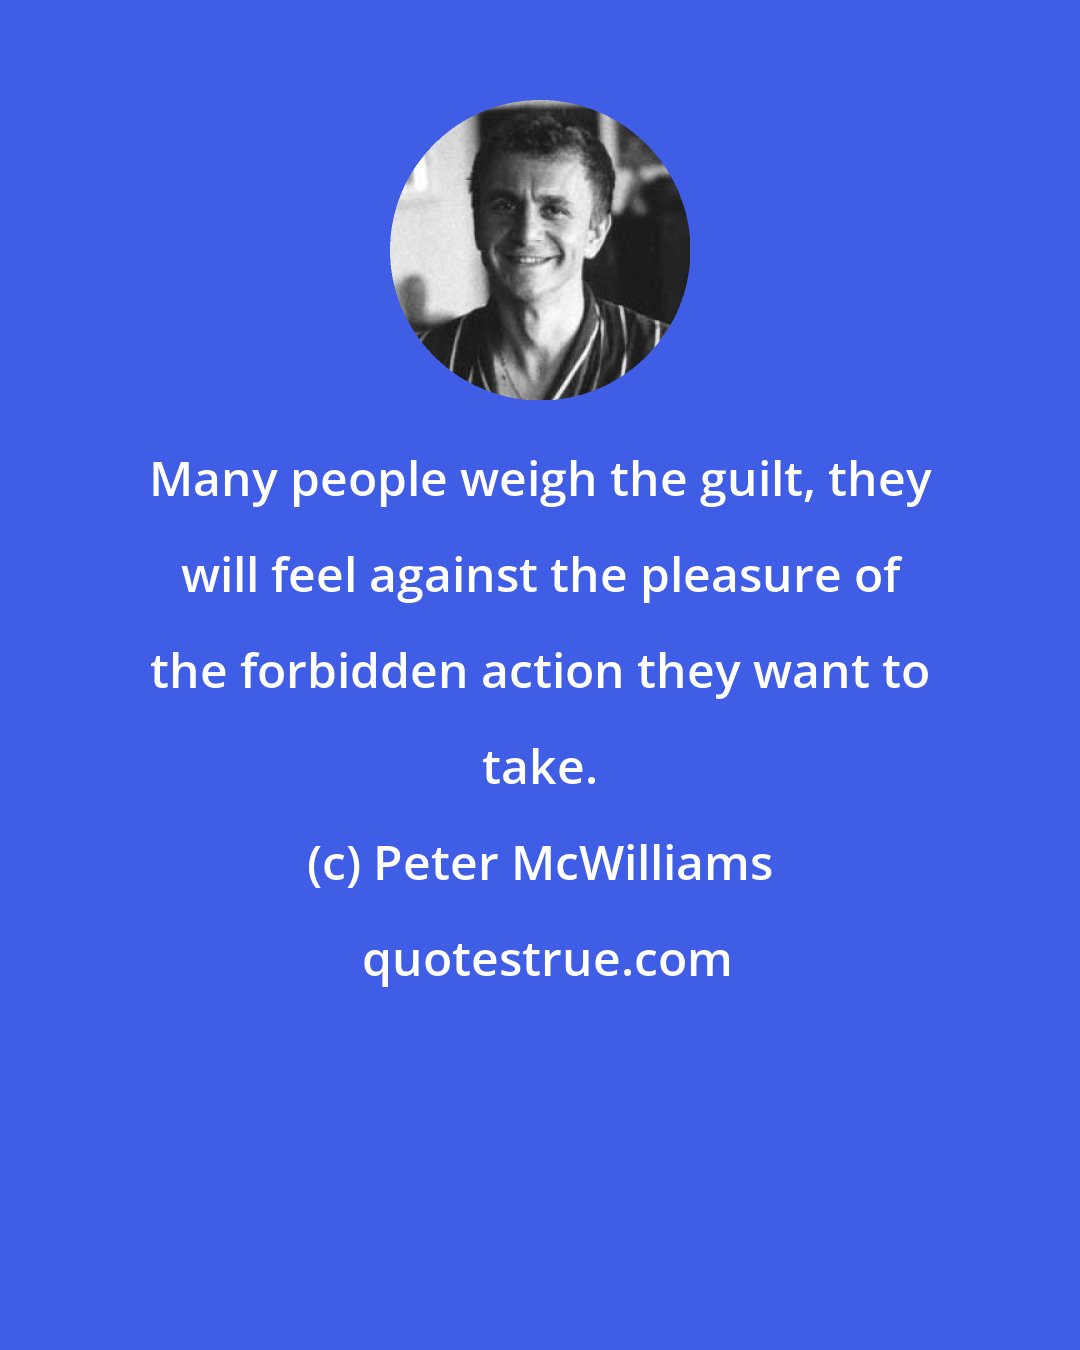 Peter McWilliams: Many people weigh the guilt, they will feel against the pleasure of the forbidden action they want to take.